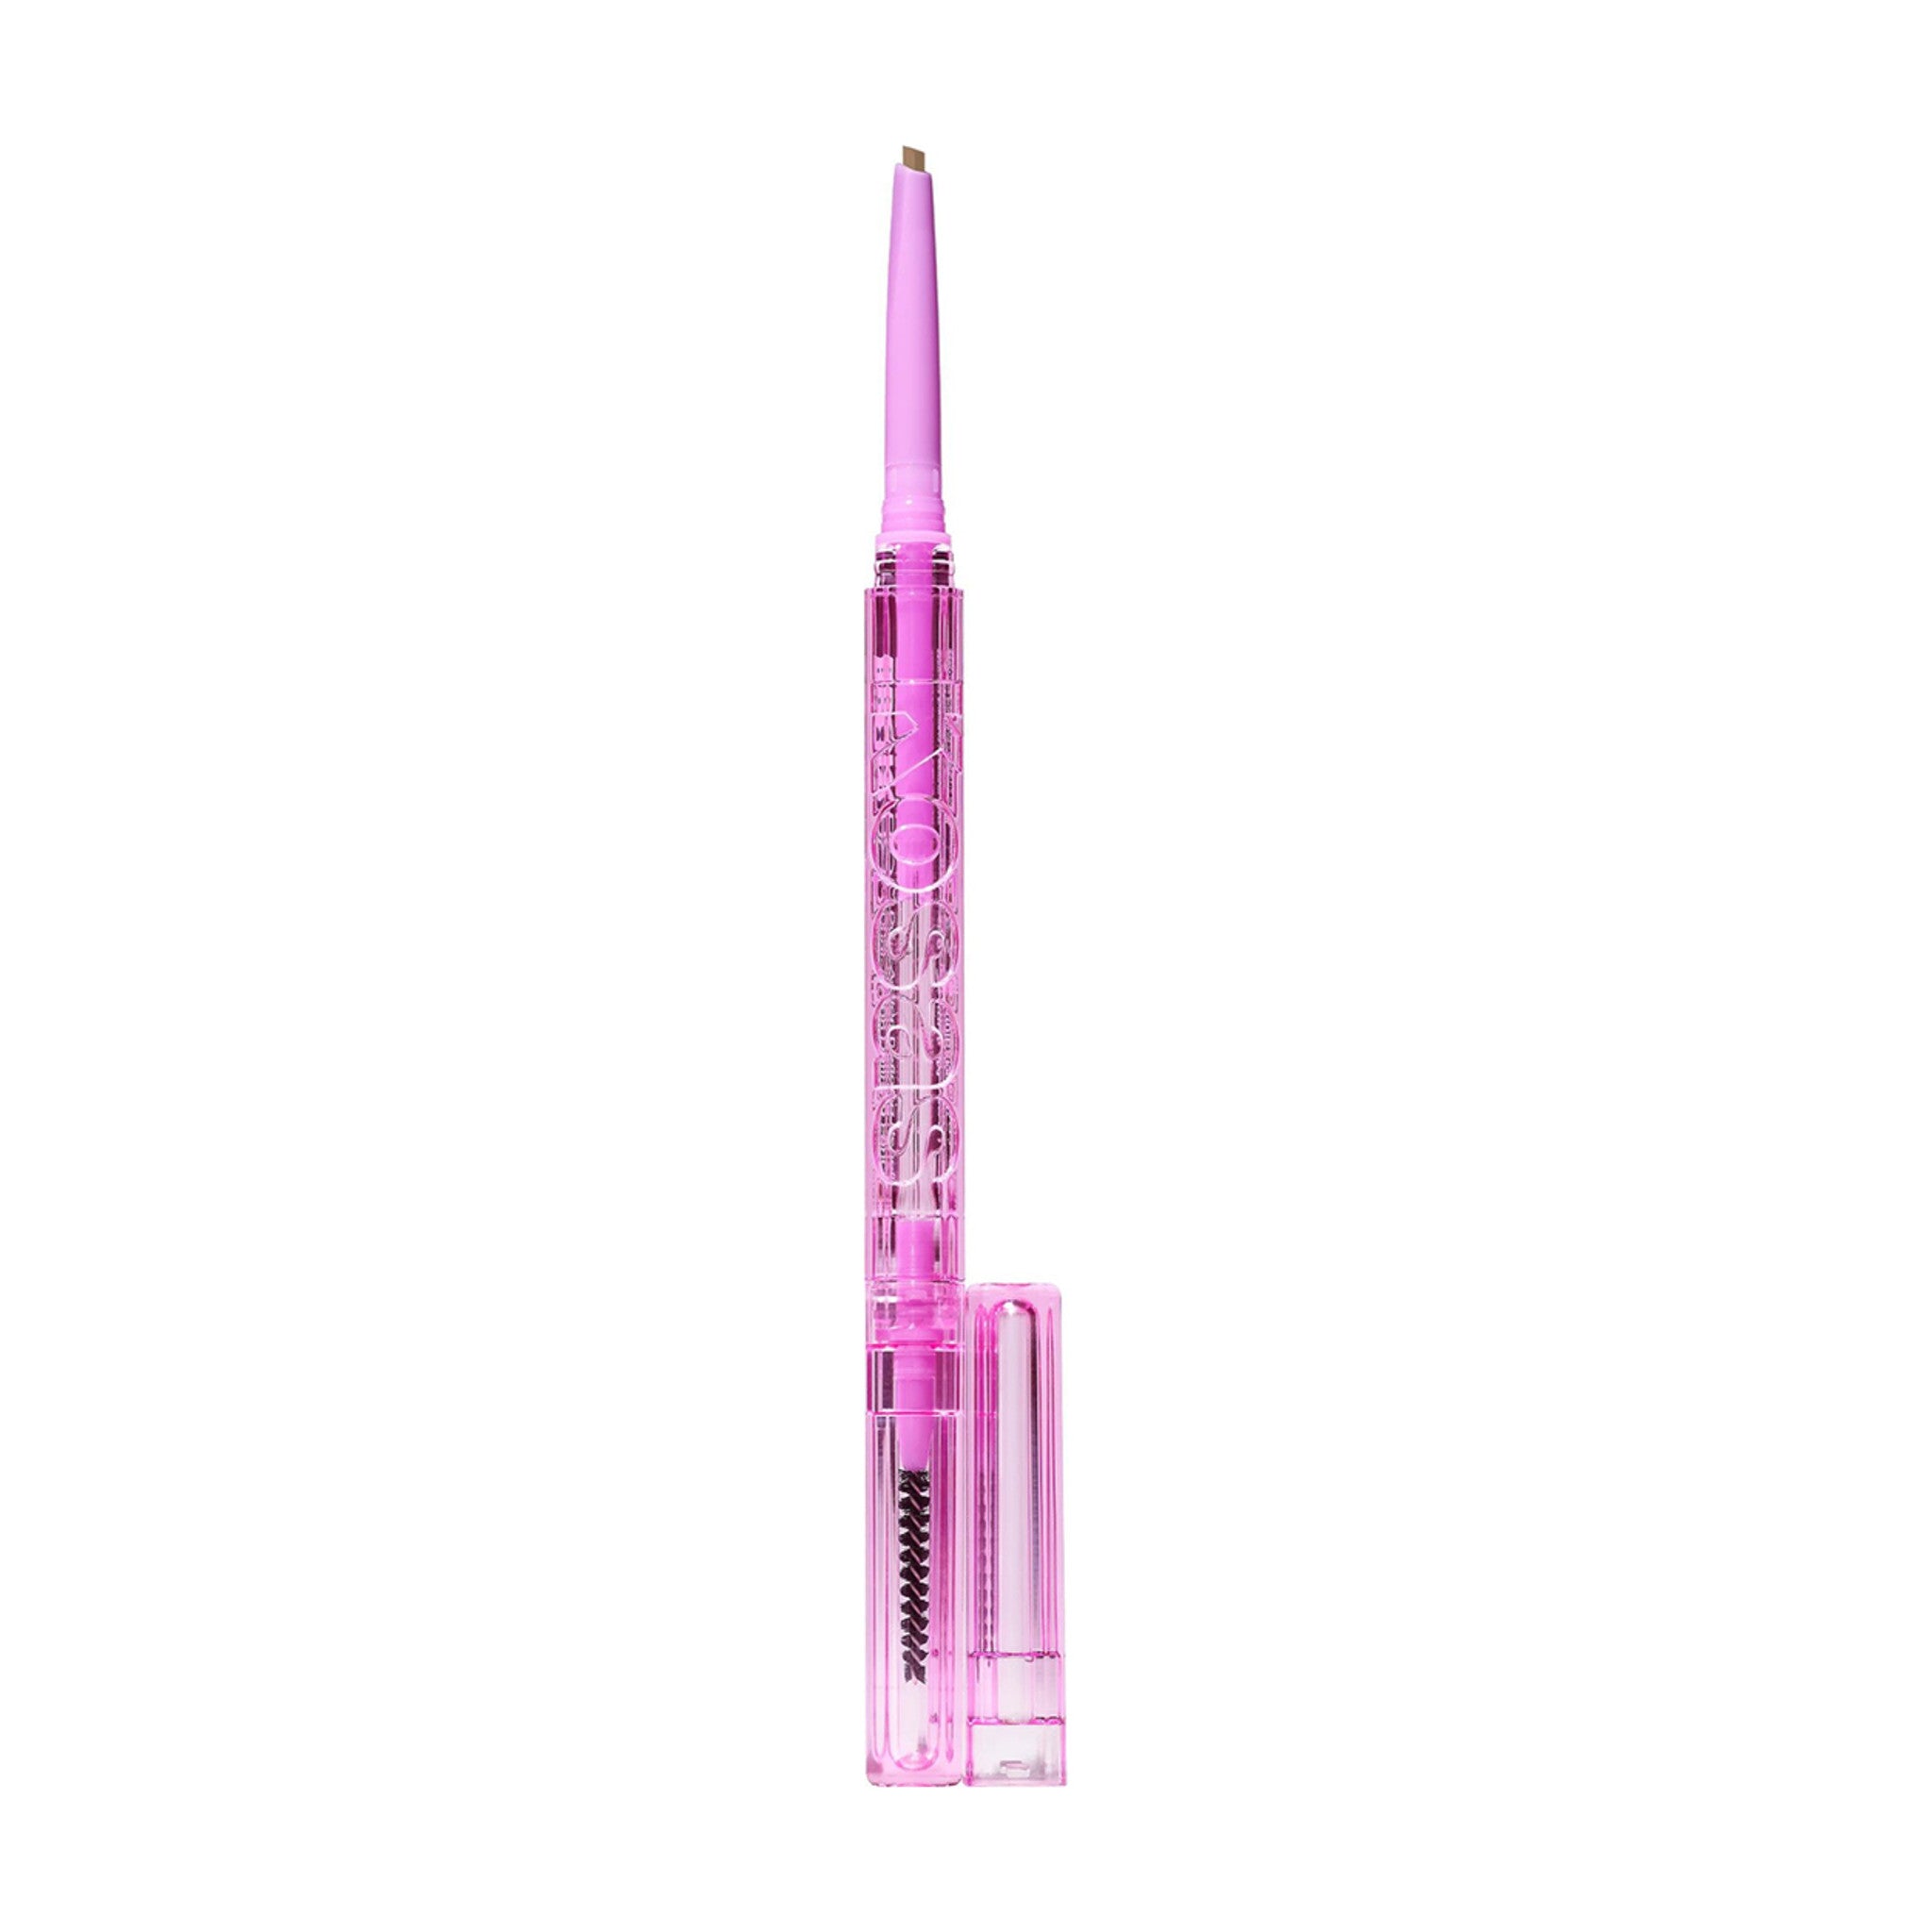 Kosas Brow Pop Dual-Action Defining Pencil Color/Shade variant: Taupe main image. This product is in the color nude